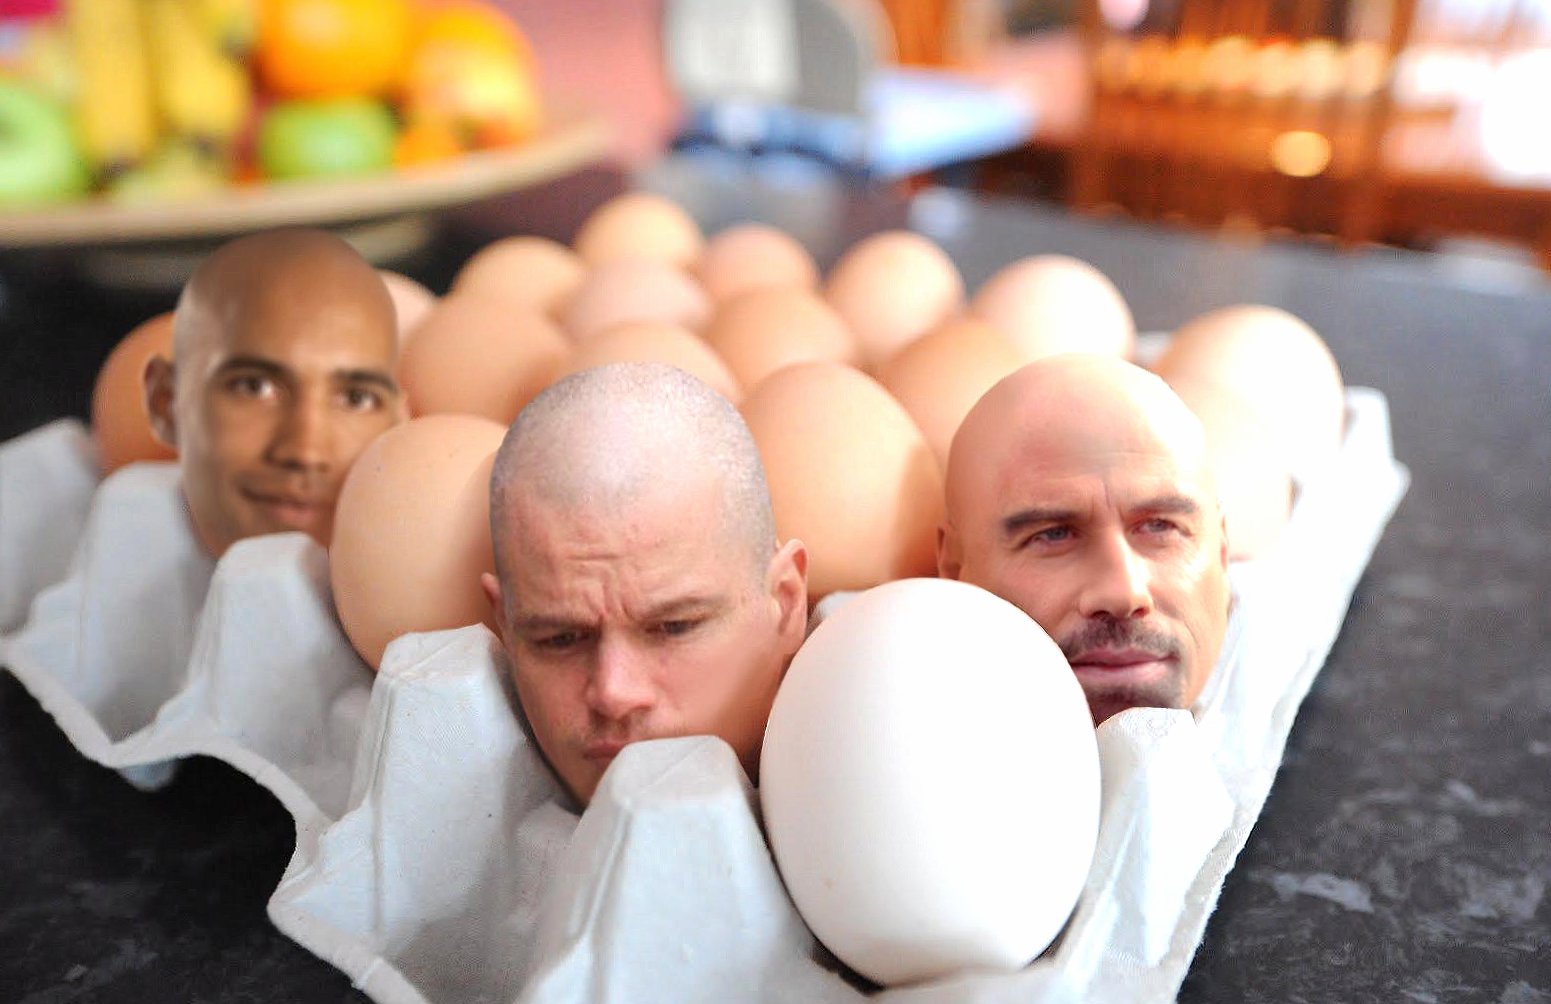 Weird eggs or celebrity heads wallpapers HD quality